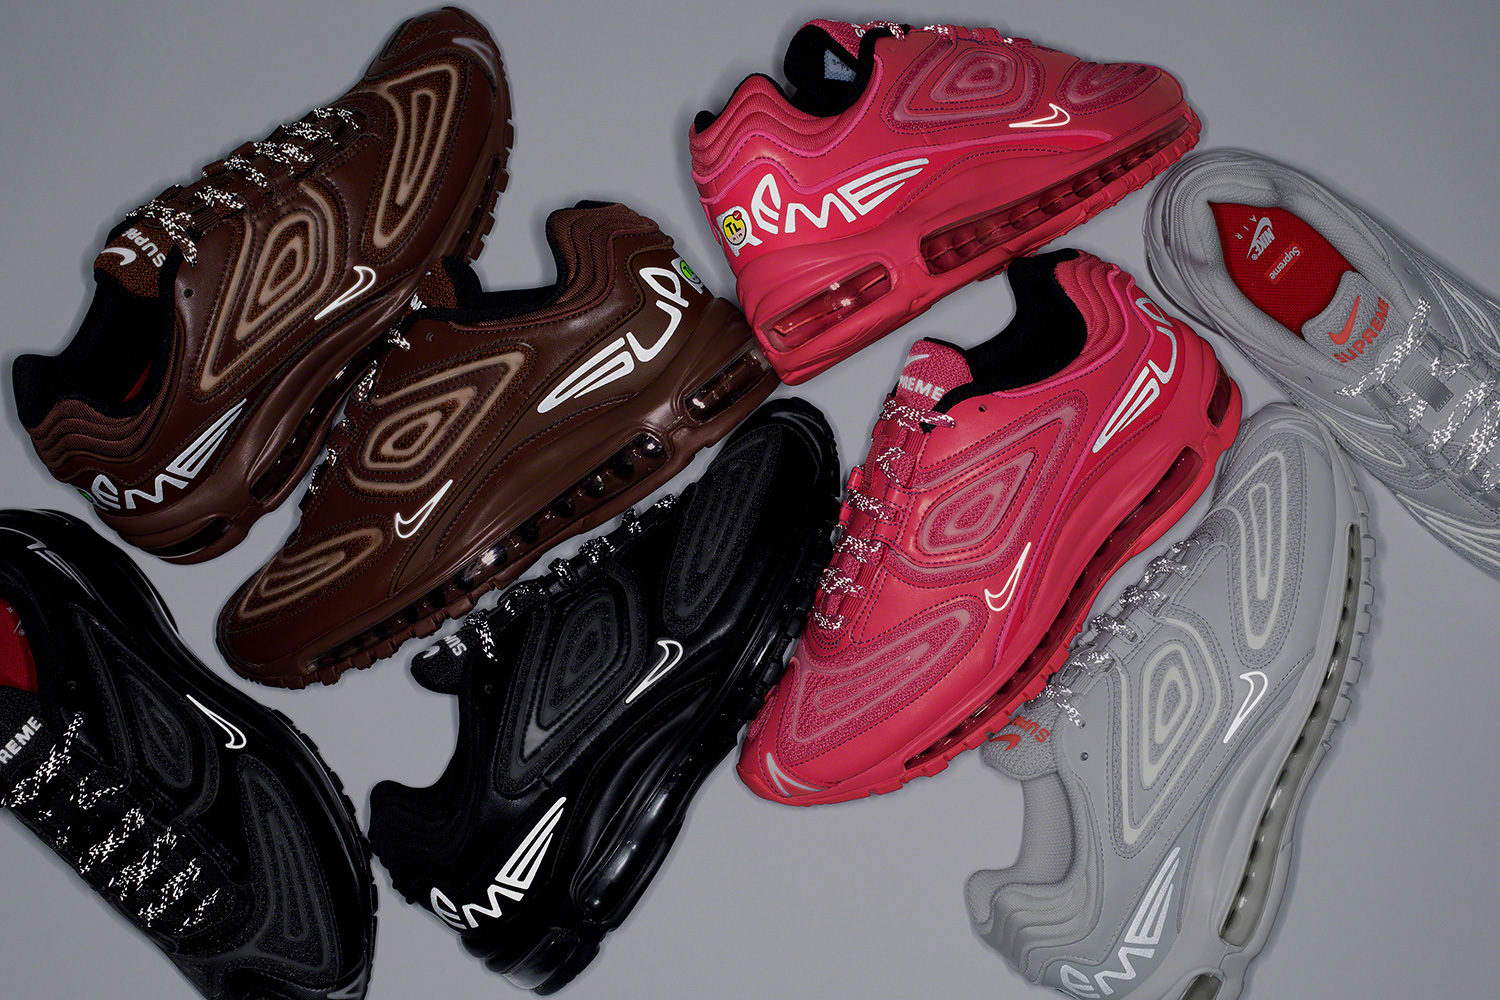 Supreme x Nike Air Max 98 TL Officially Revealed: Photos